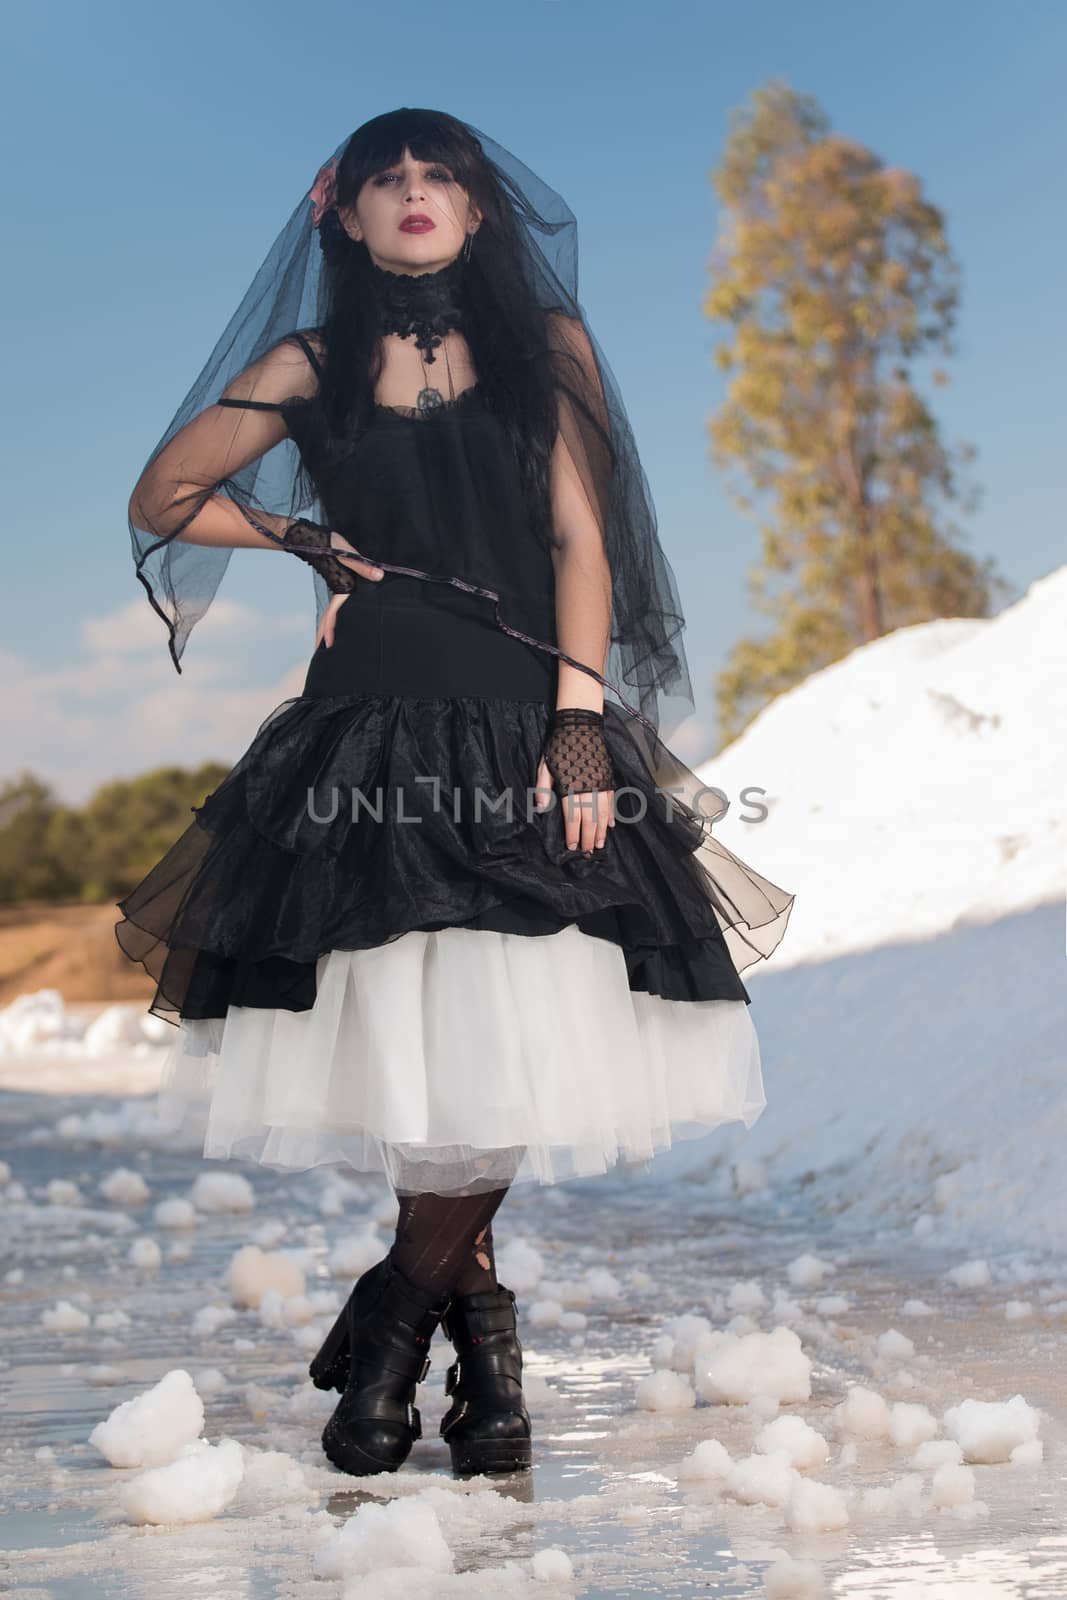 View of a beautiful young girl in gothic clothing on a salt evaporation pond.